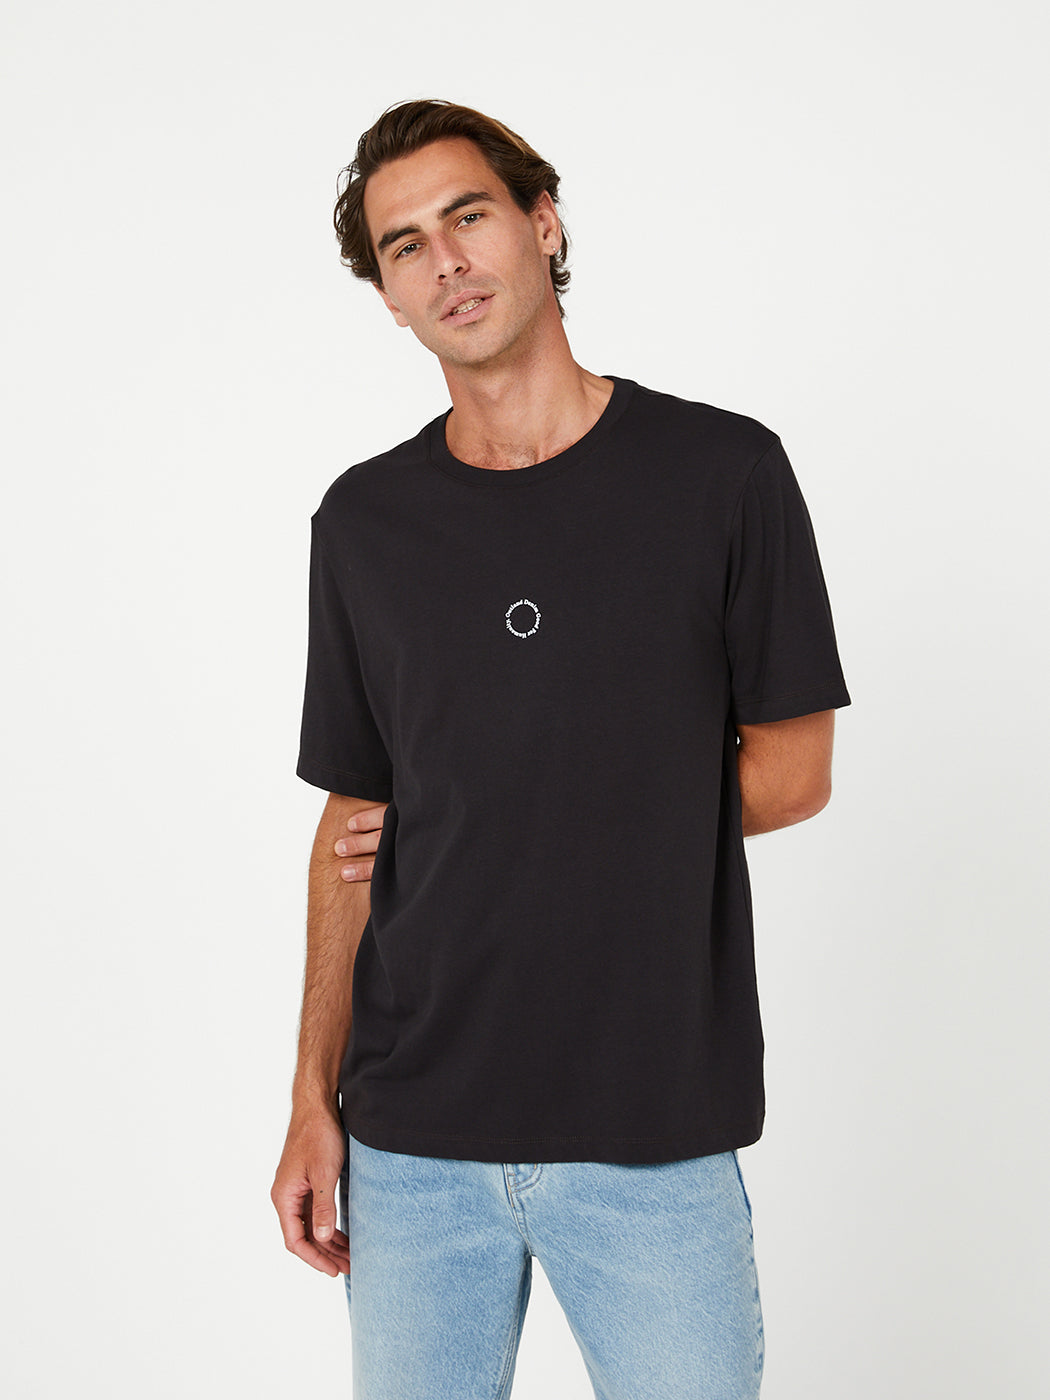 Essential Iconic Tee - Charcoal